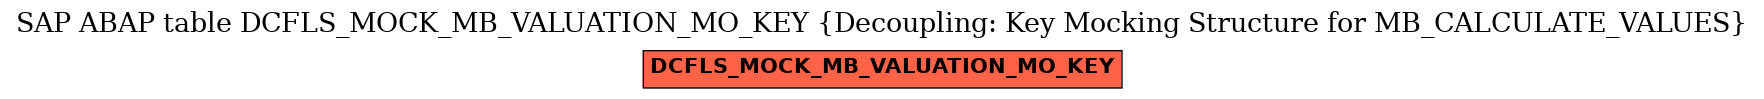 E-R Diagram for table DCFLS_MOCK_MB_VALUATION_MO_KEY (Decoupling: Key Mocking Structure for MB_CALCULATE_VALUES)